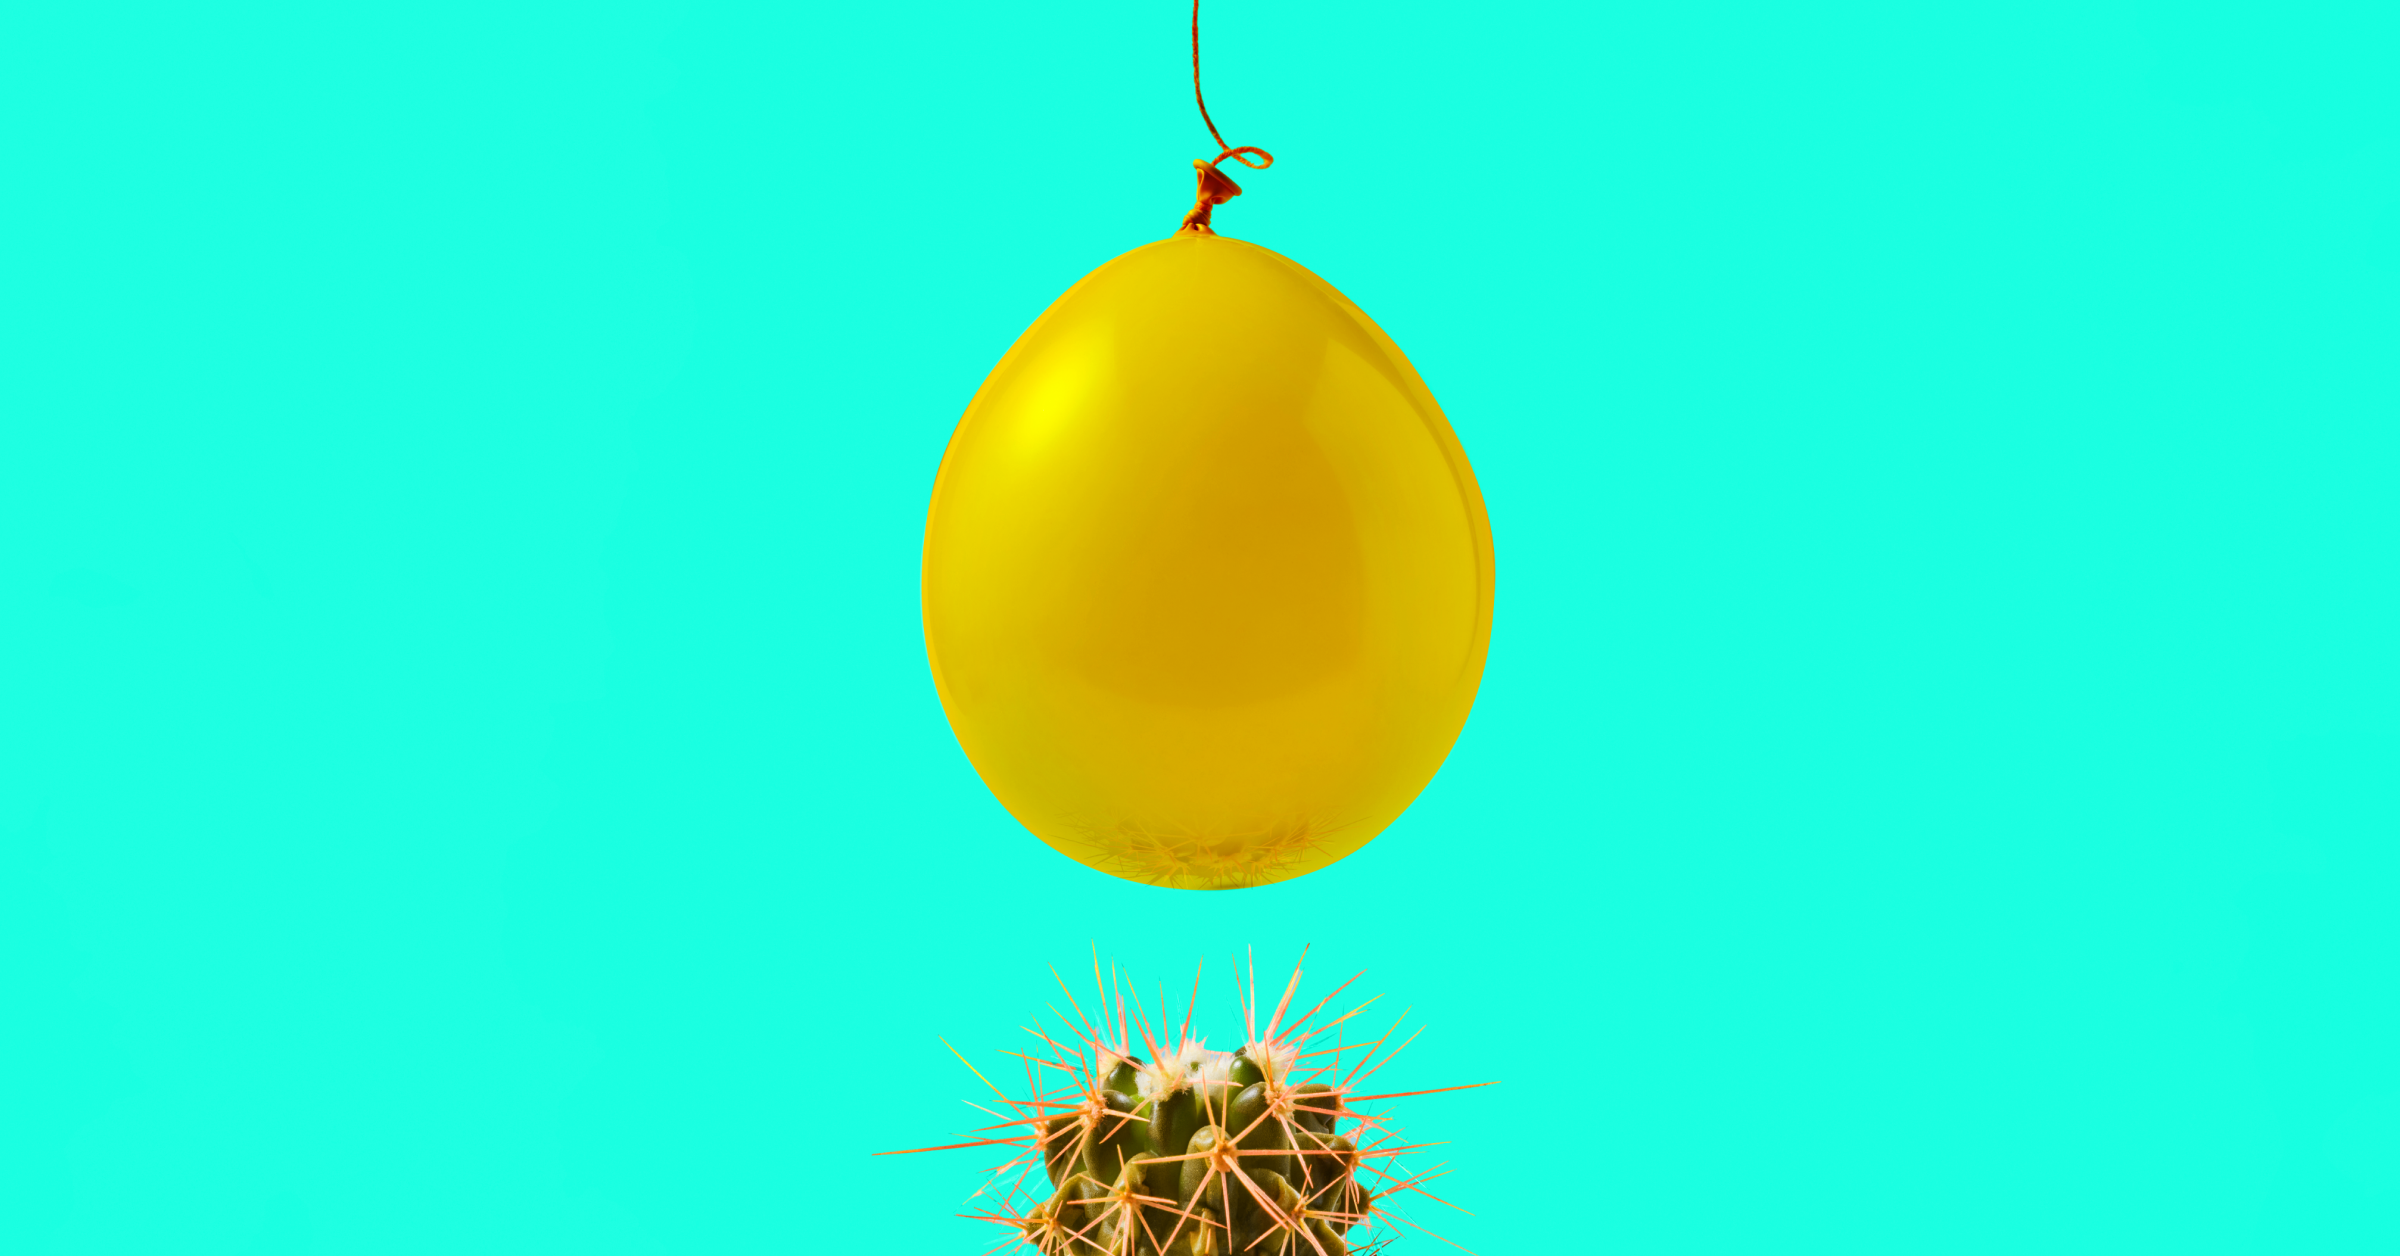 A yellow balloon hanging over a cactus on a blue background. 